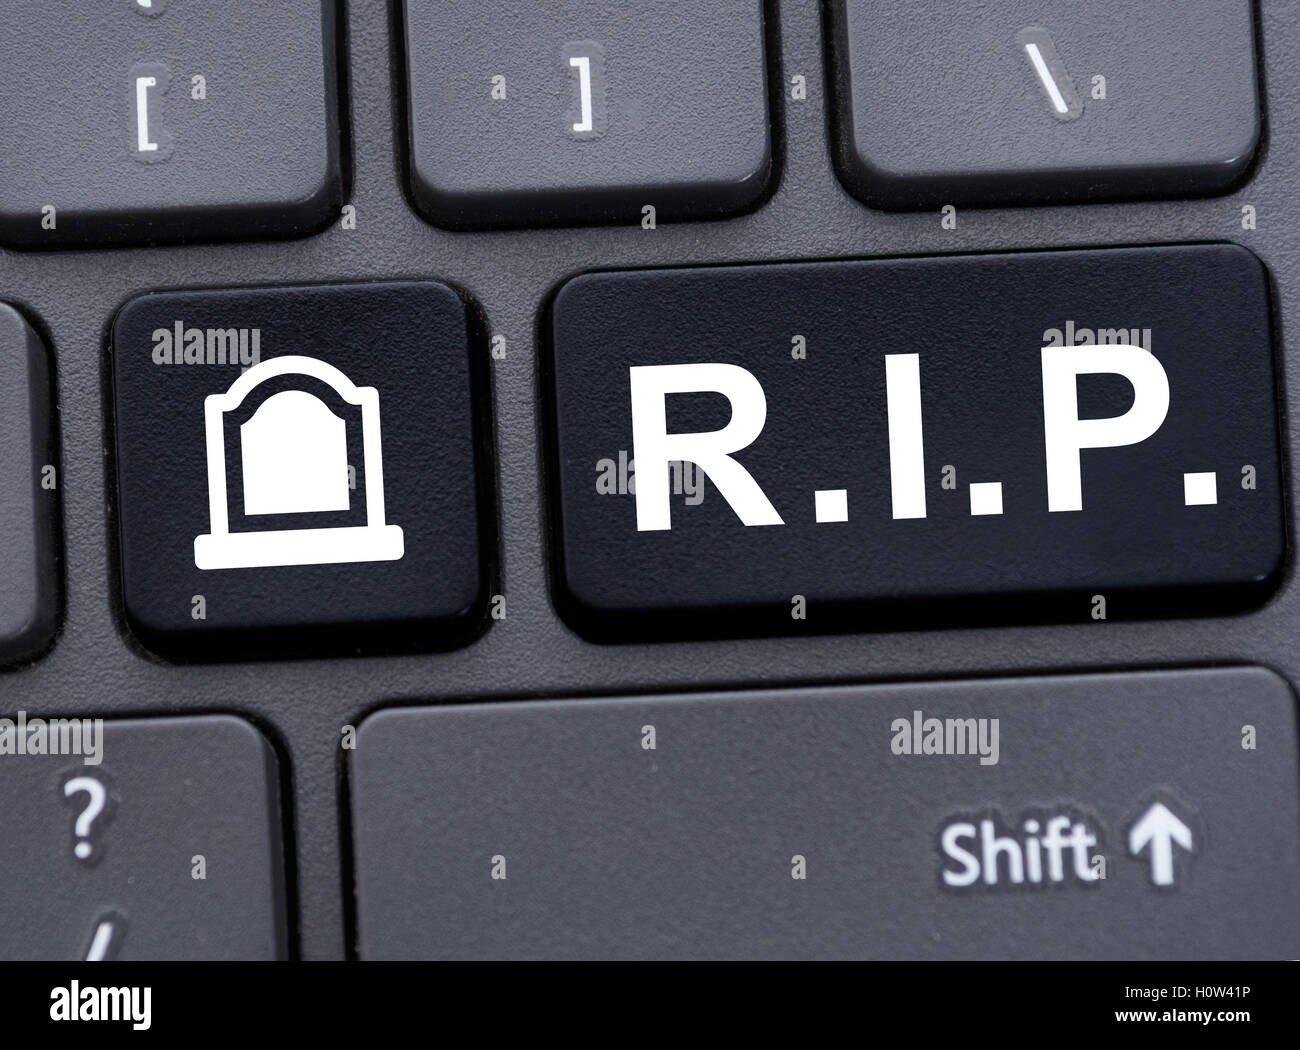 Online memorial concept with R.I.P. abbreviation button on computer keyboard Stock Photo